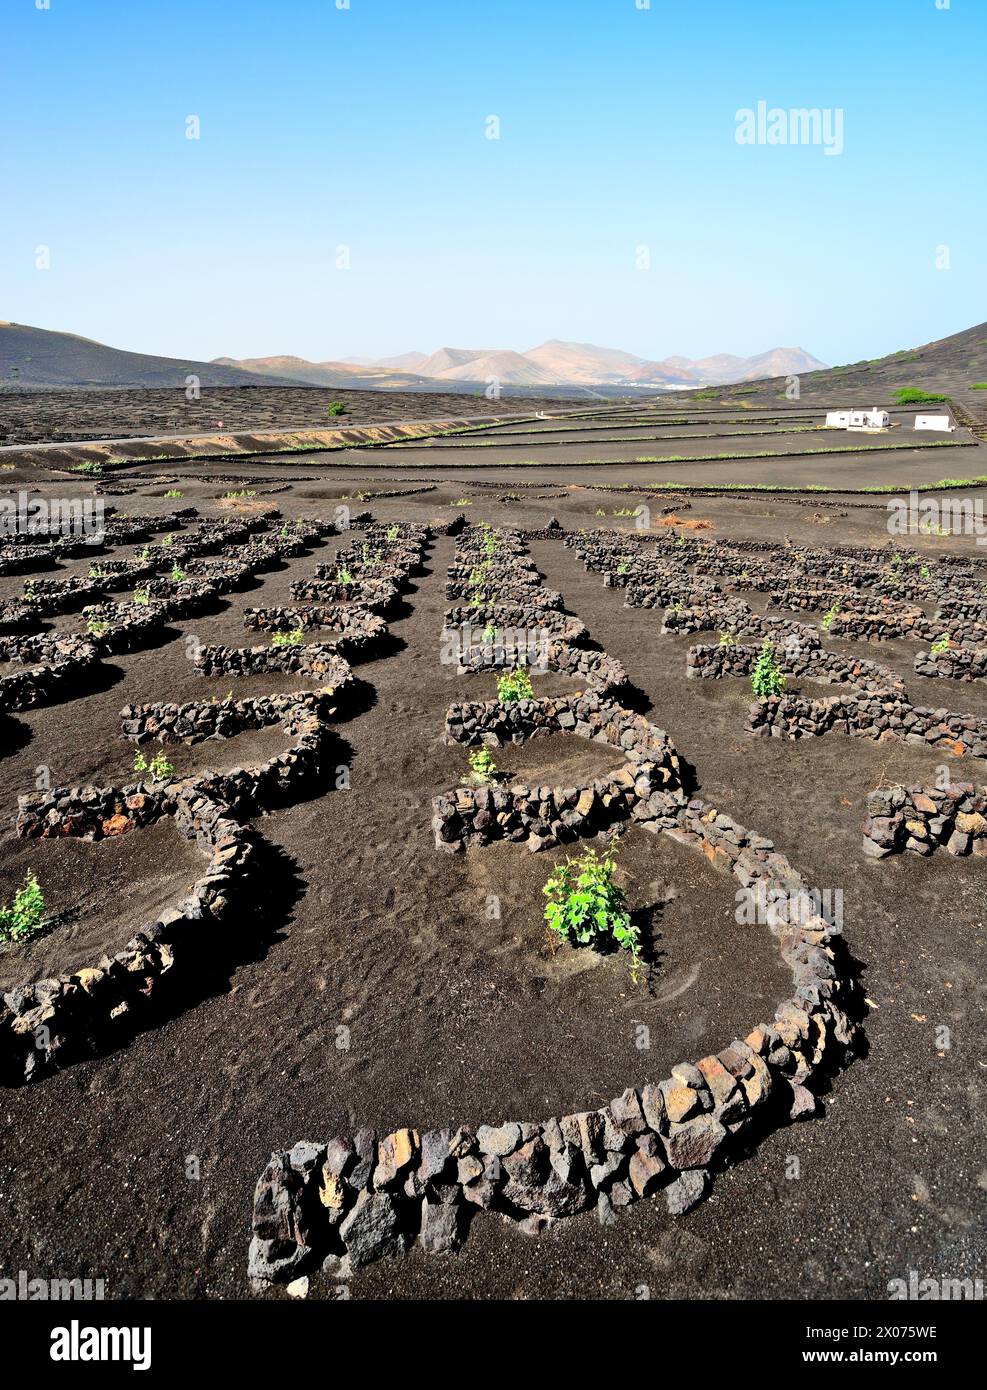 A wine plantation (Bodega) on the island of Lanzarote. The vines grow in volcanic ash and are protected from the wind by semi-circular stone walls. Stock Photo